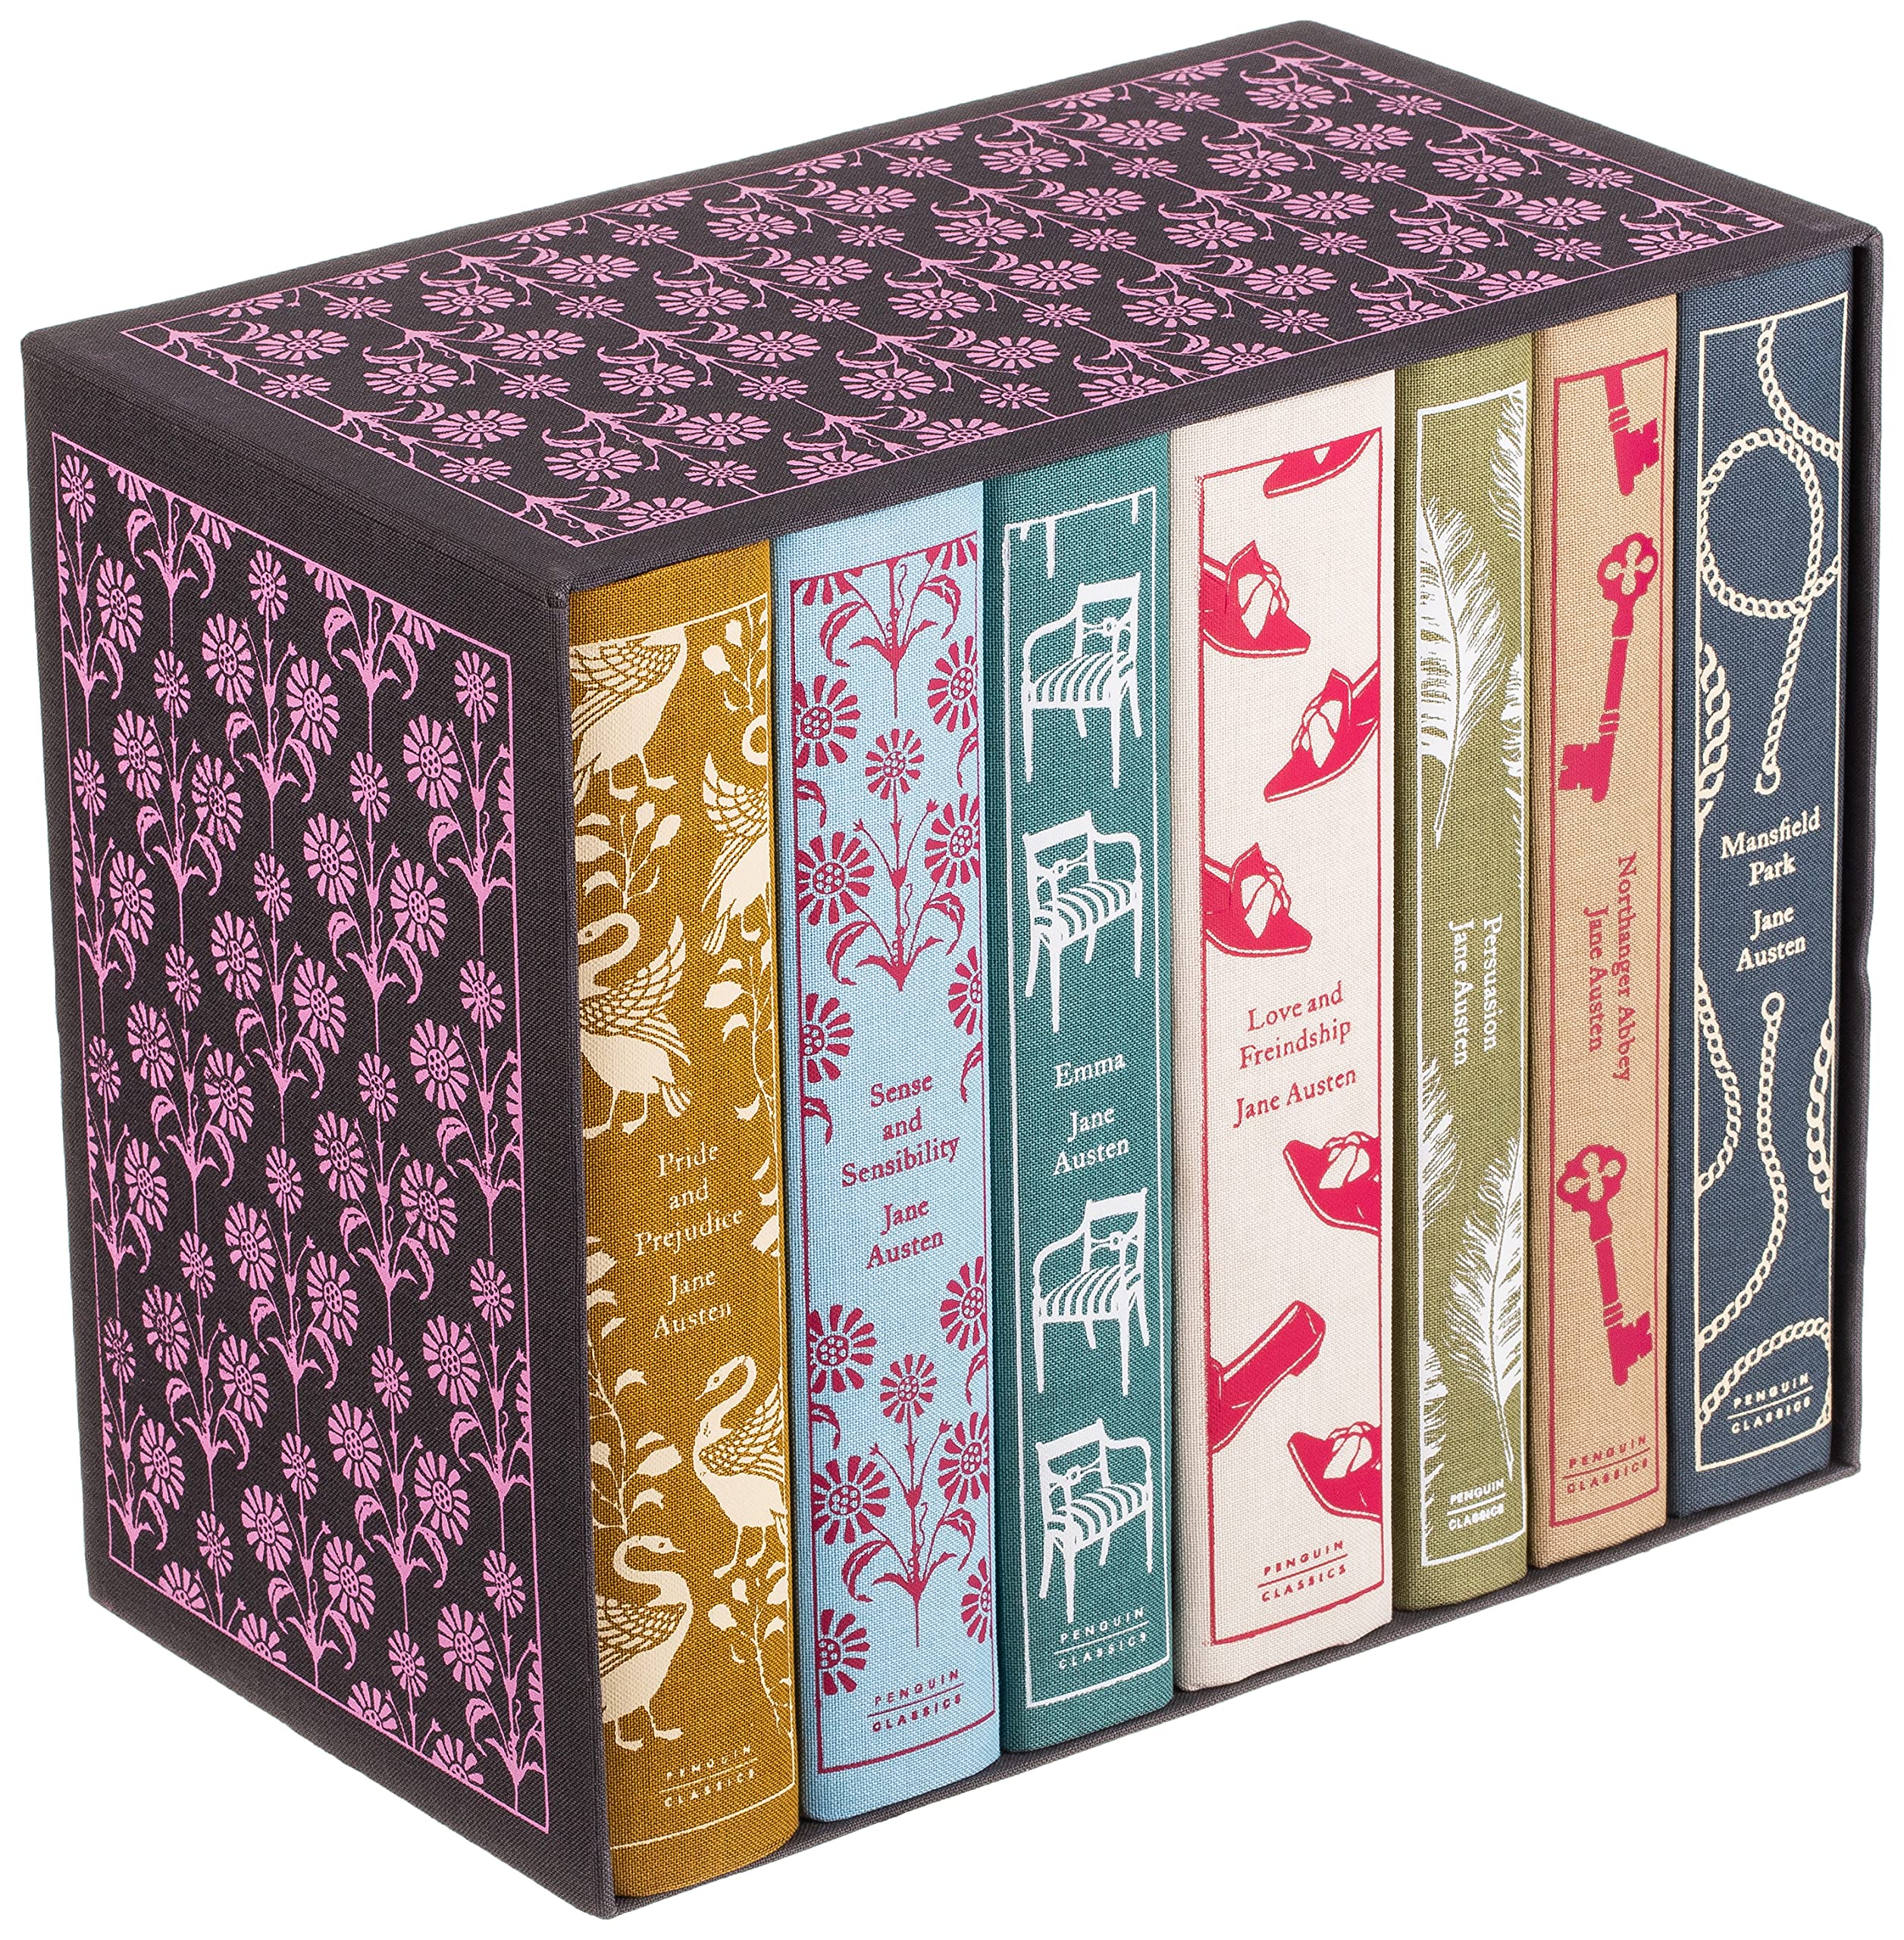 Jane Austen: The Complete Works 7-Book Boxed Set: Sense and Sensibility; Pride and Prejudice; Mansfield Park; Emma; Northanger Abbey; Persuasion; Love and Friendship Hardcover by Jane Austen, Coralie Bickford-Smith (Illustrator)